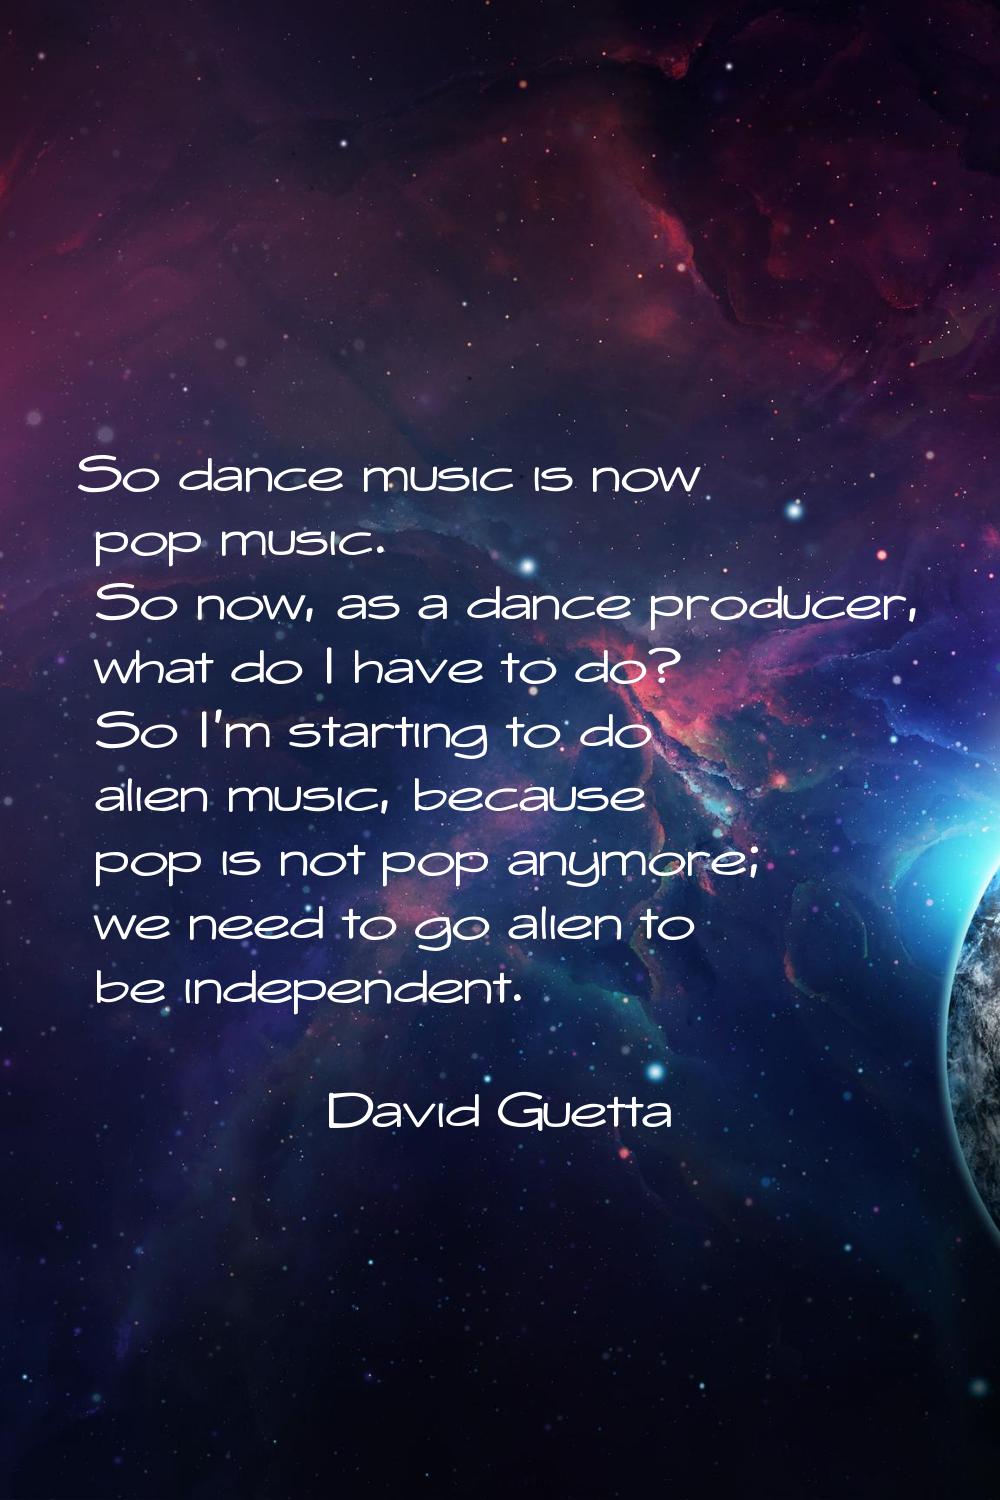 So dance music is now pop music. So now, as a dance producer, what do I have to do? So I'm starting